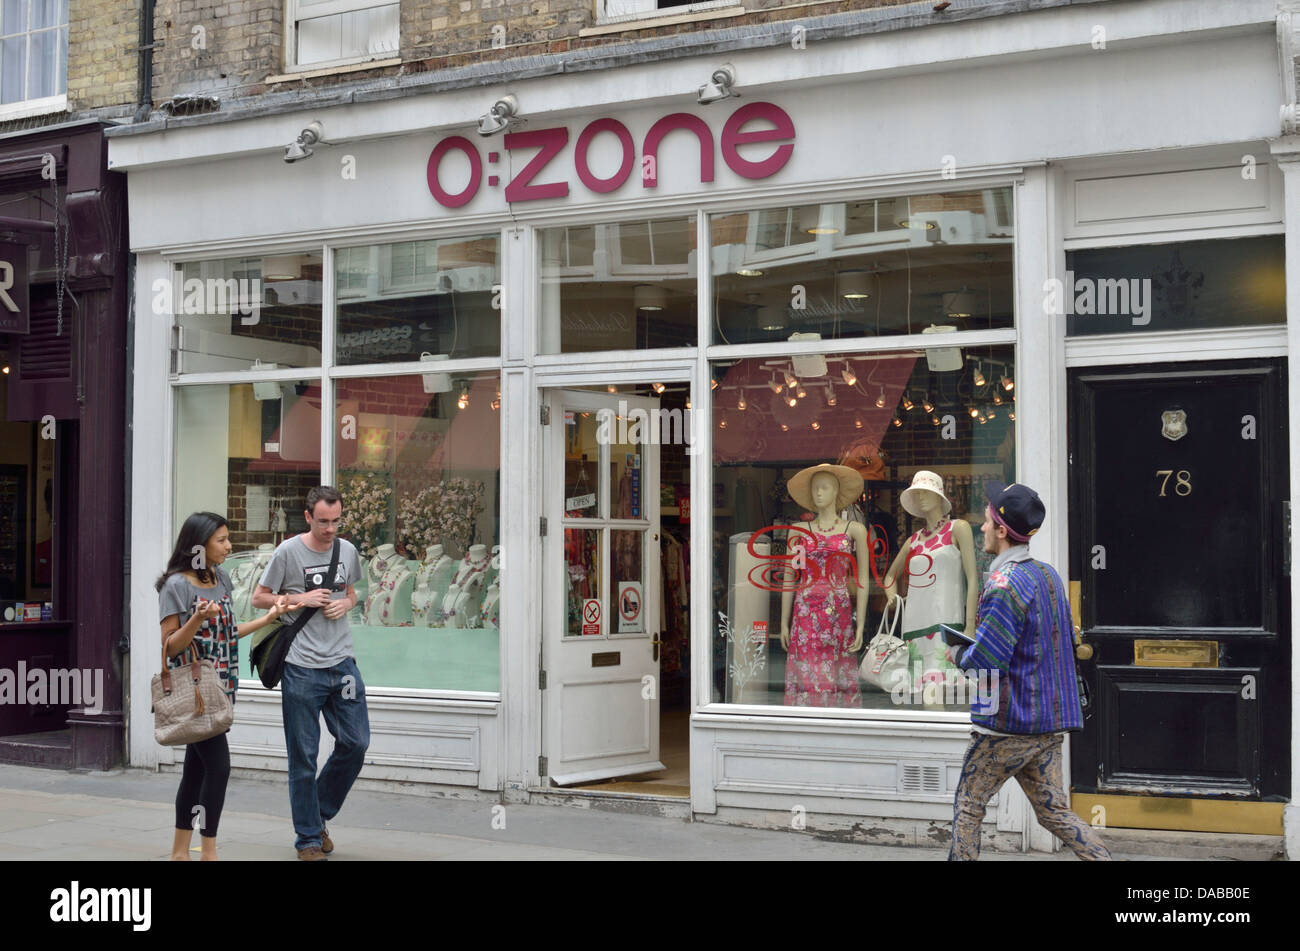 The Ozone fashion shop in Long Acre, Covent Garden, London, UK. Stock Photo